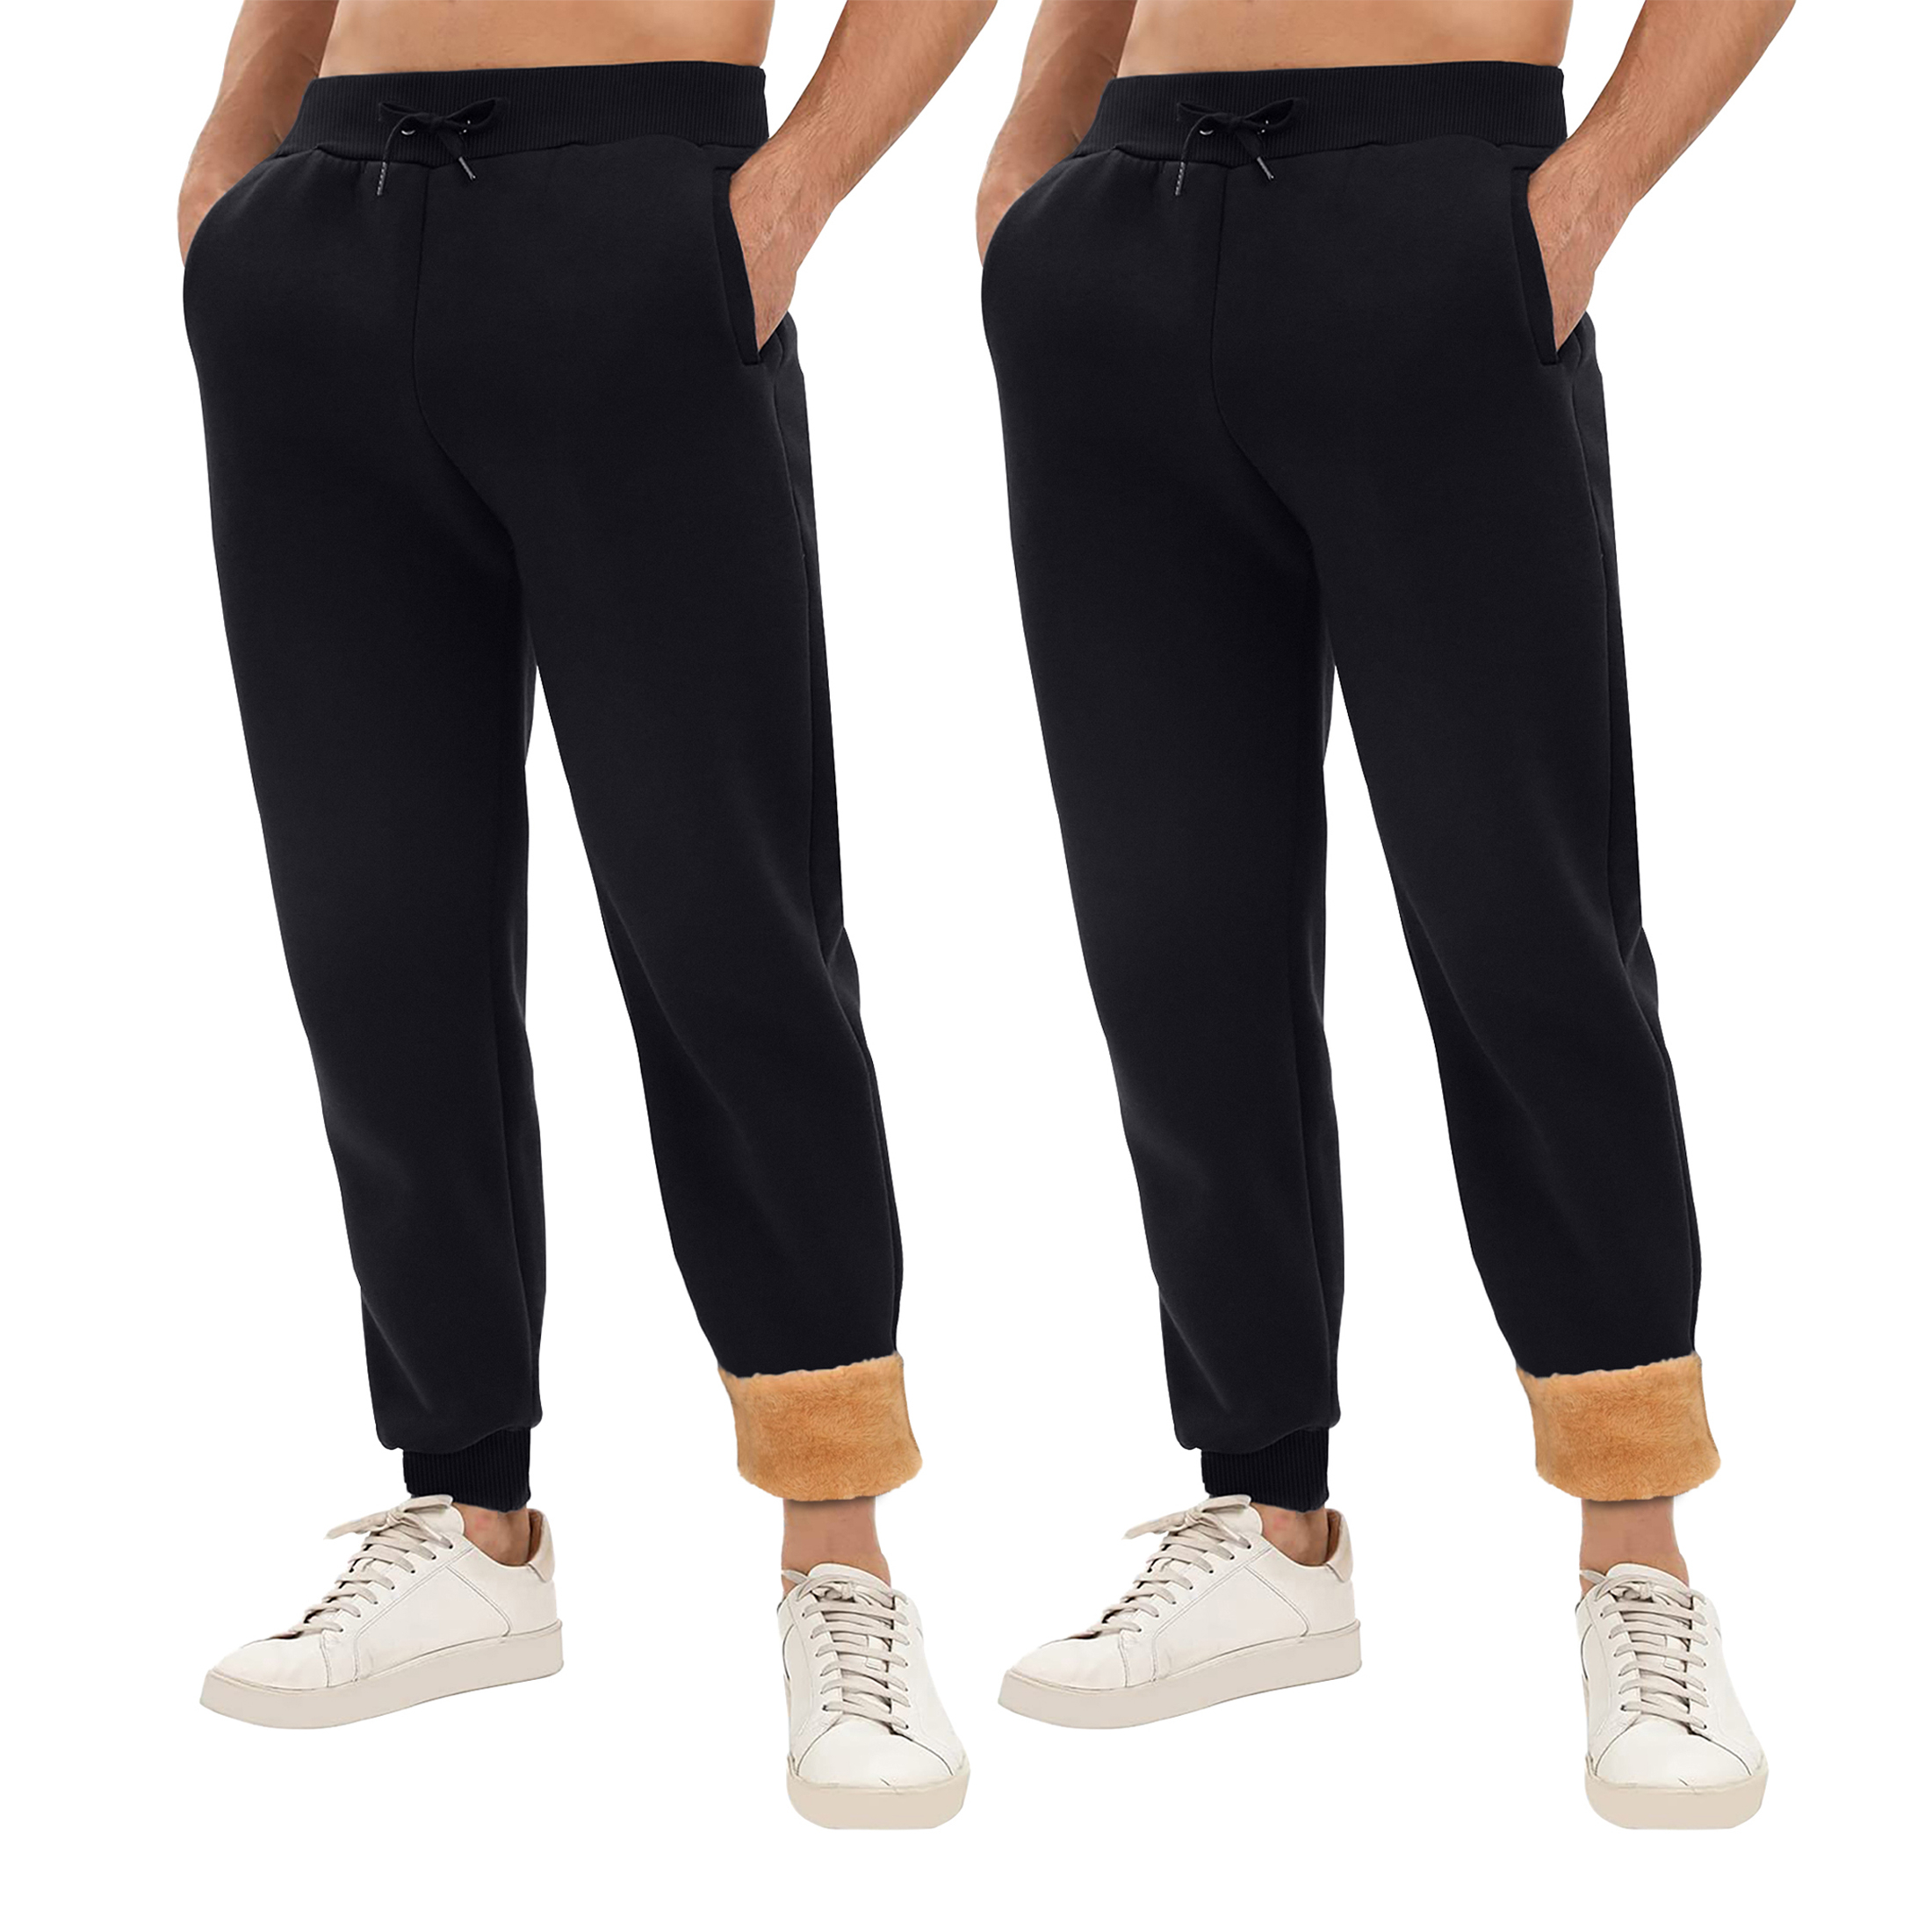 2-Pack: Men's Winter Warm Thick Sherpa Lined Jogger Track Pants With Pockets - Black, 2X-Large